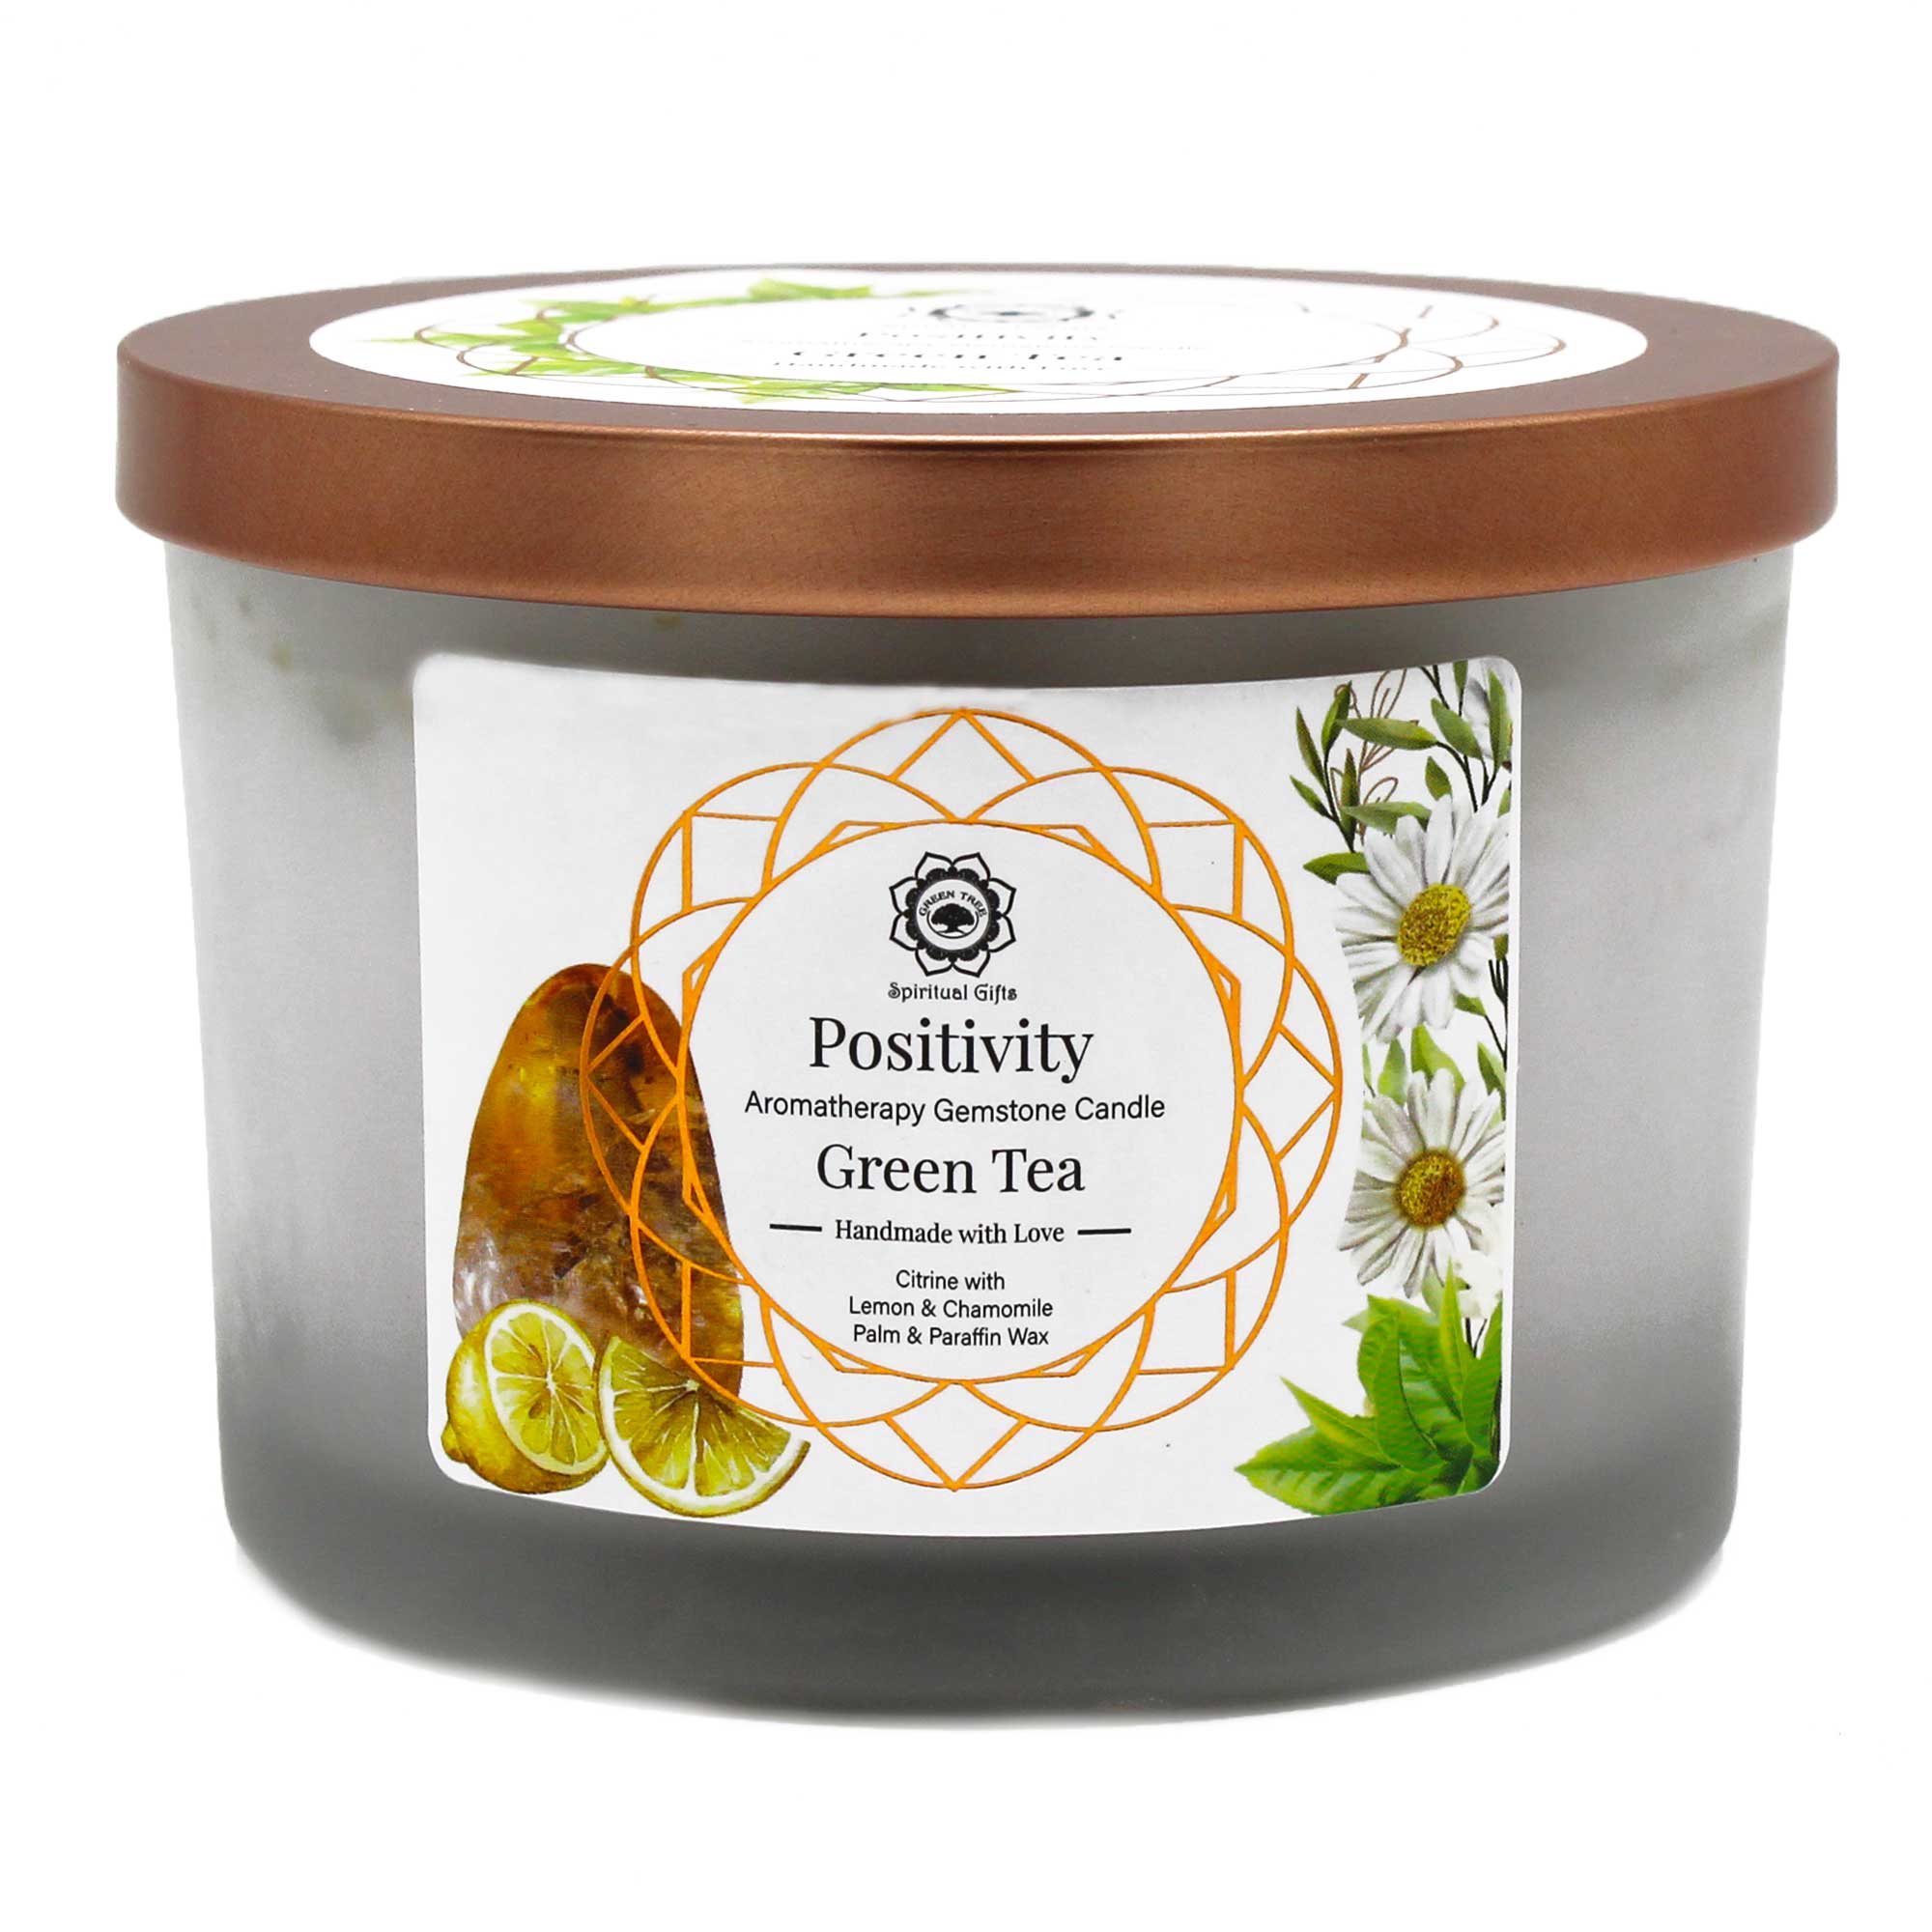 View Green Tea and Citrine Gemstone Candle Positivity information